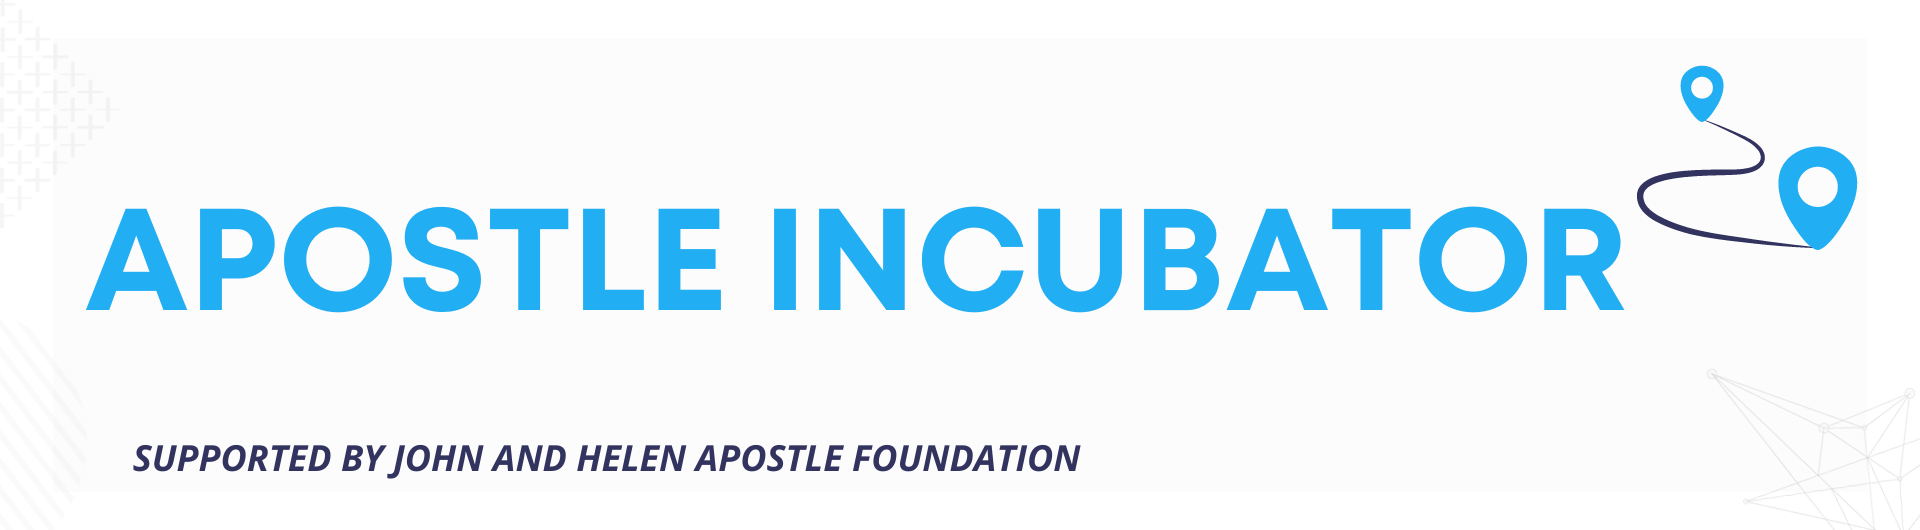 Apostle Incubator Your Entrepreneurial Journey starts NOW!  Pursue your creative idea and launch your startup. Supported by the John & Helen Apostle Foundation two logos on top with geometric abstract shapes and designs